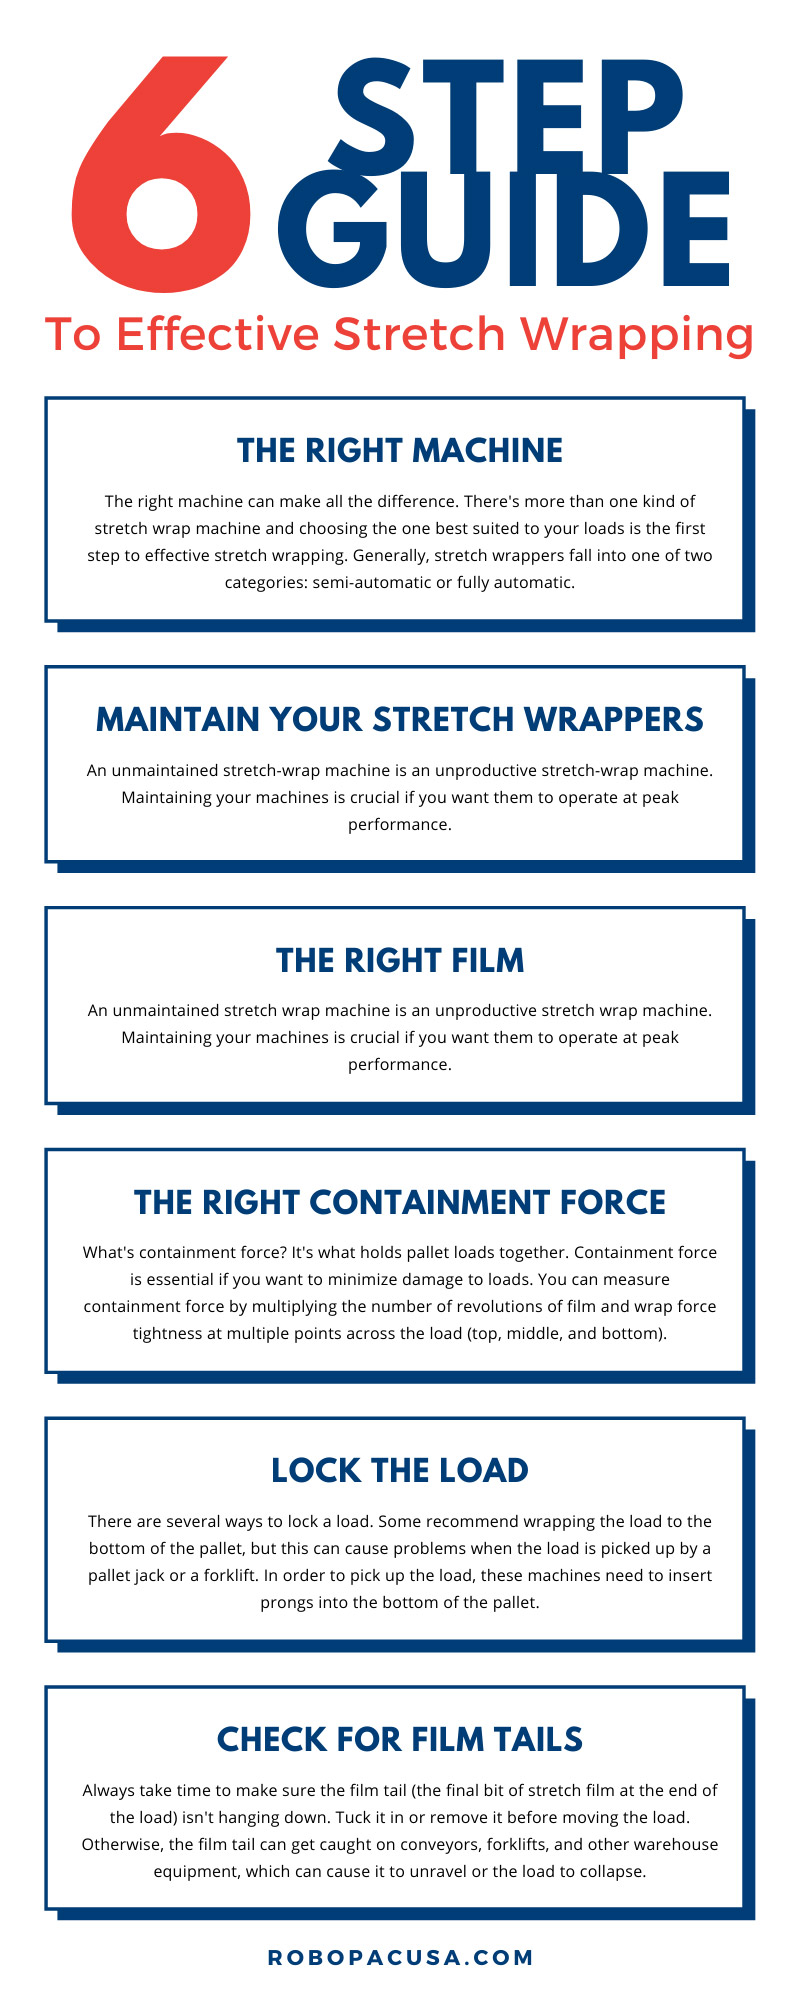 6 Step Guide To Effective Stretch Wrapping